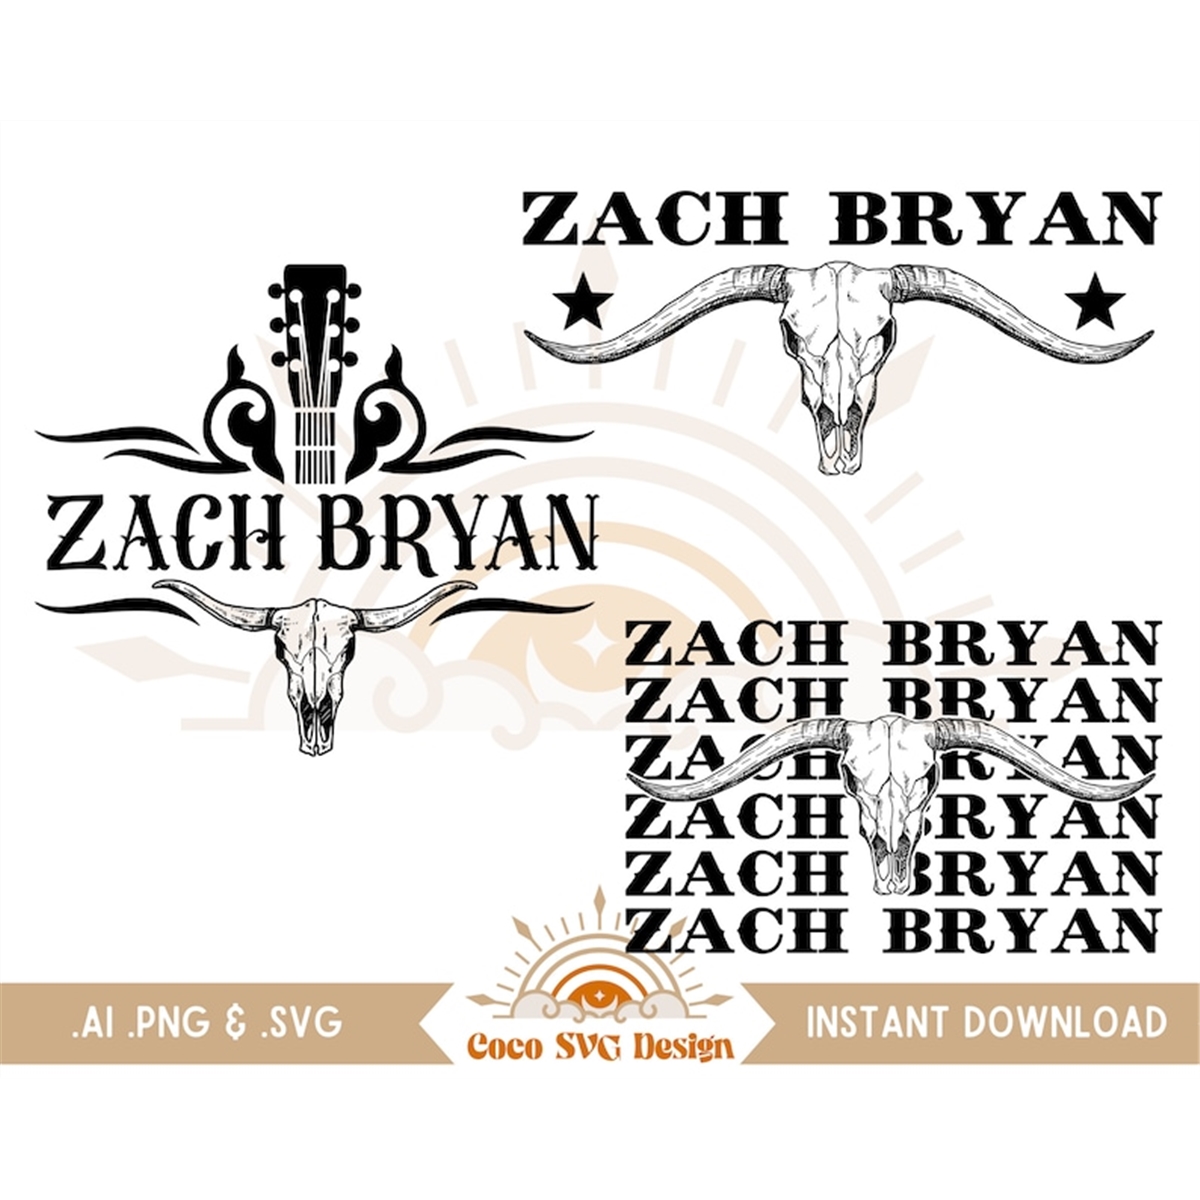 zach-bryan-png-zach-bryan-svg-country-music-wester-png-image-1